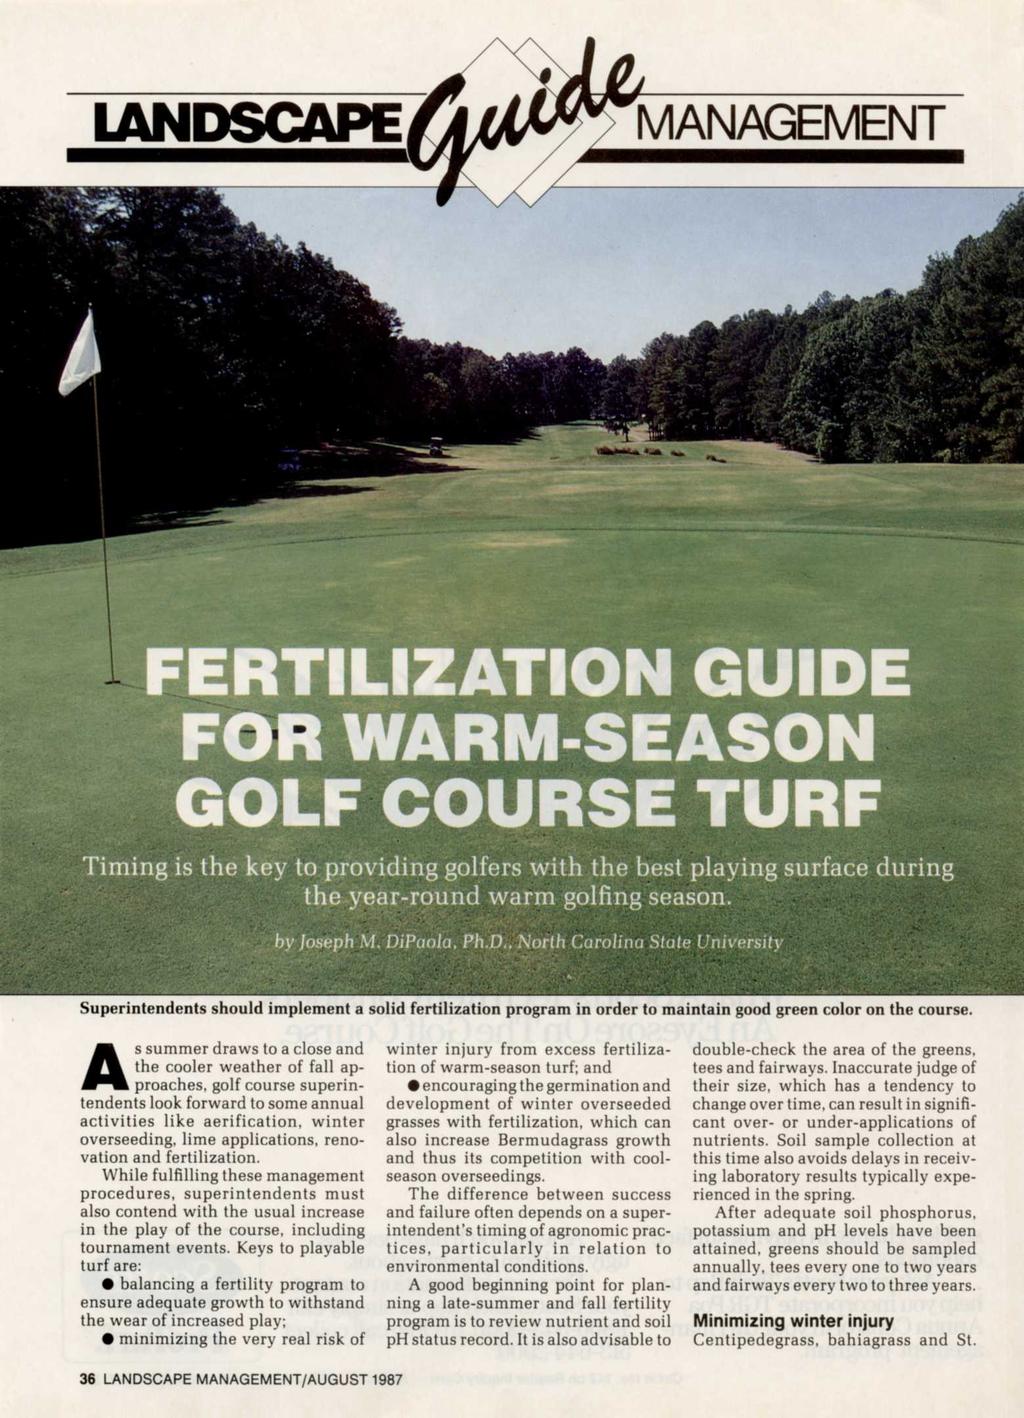 LANDSCAPE MANAGEMENT FERTILIZATION GUIDE FOR WARM-SEASON GOLF COURSE TURF Timing is the key to providing golfers with the best playing surface during the year-round warm golfing season. by Joseph M.